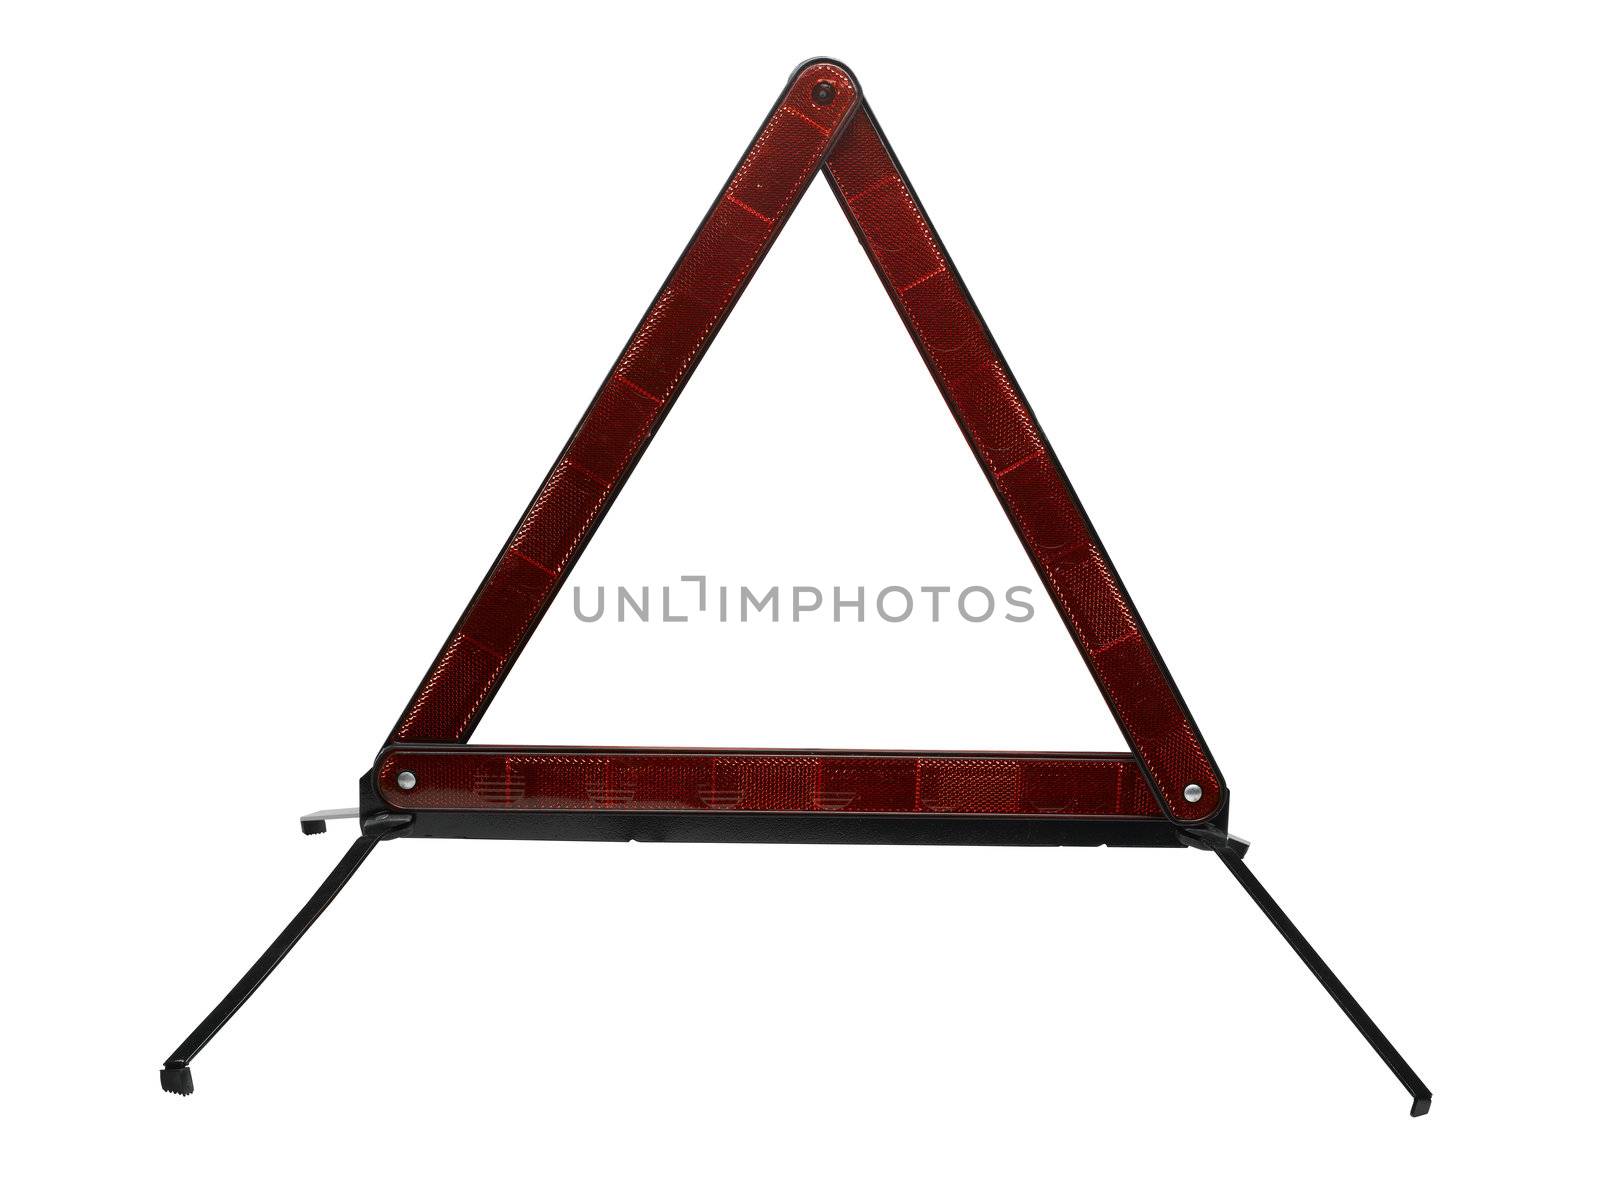 Highway Safety Triangle (clipping path) by pbombaert